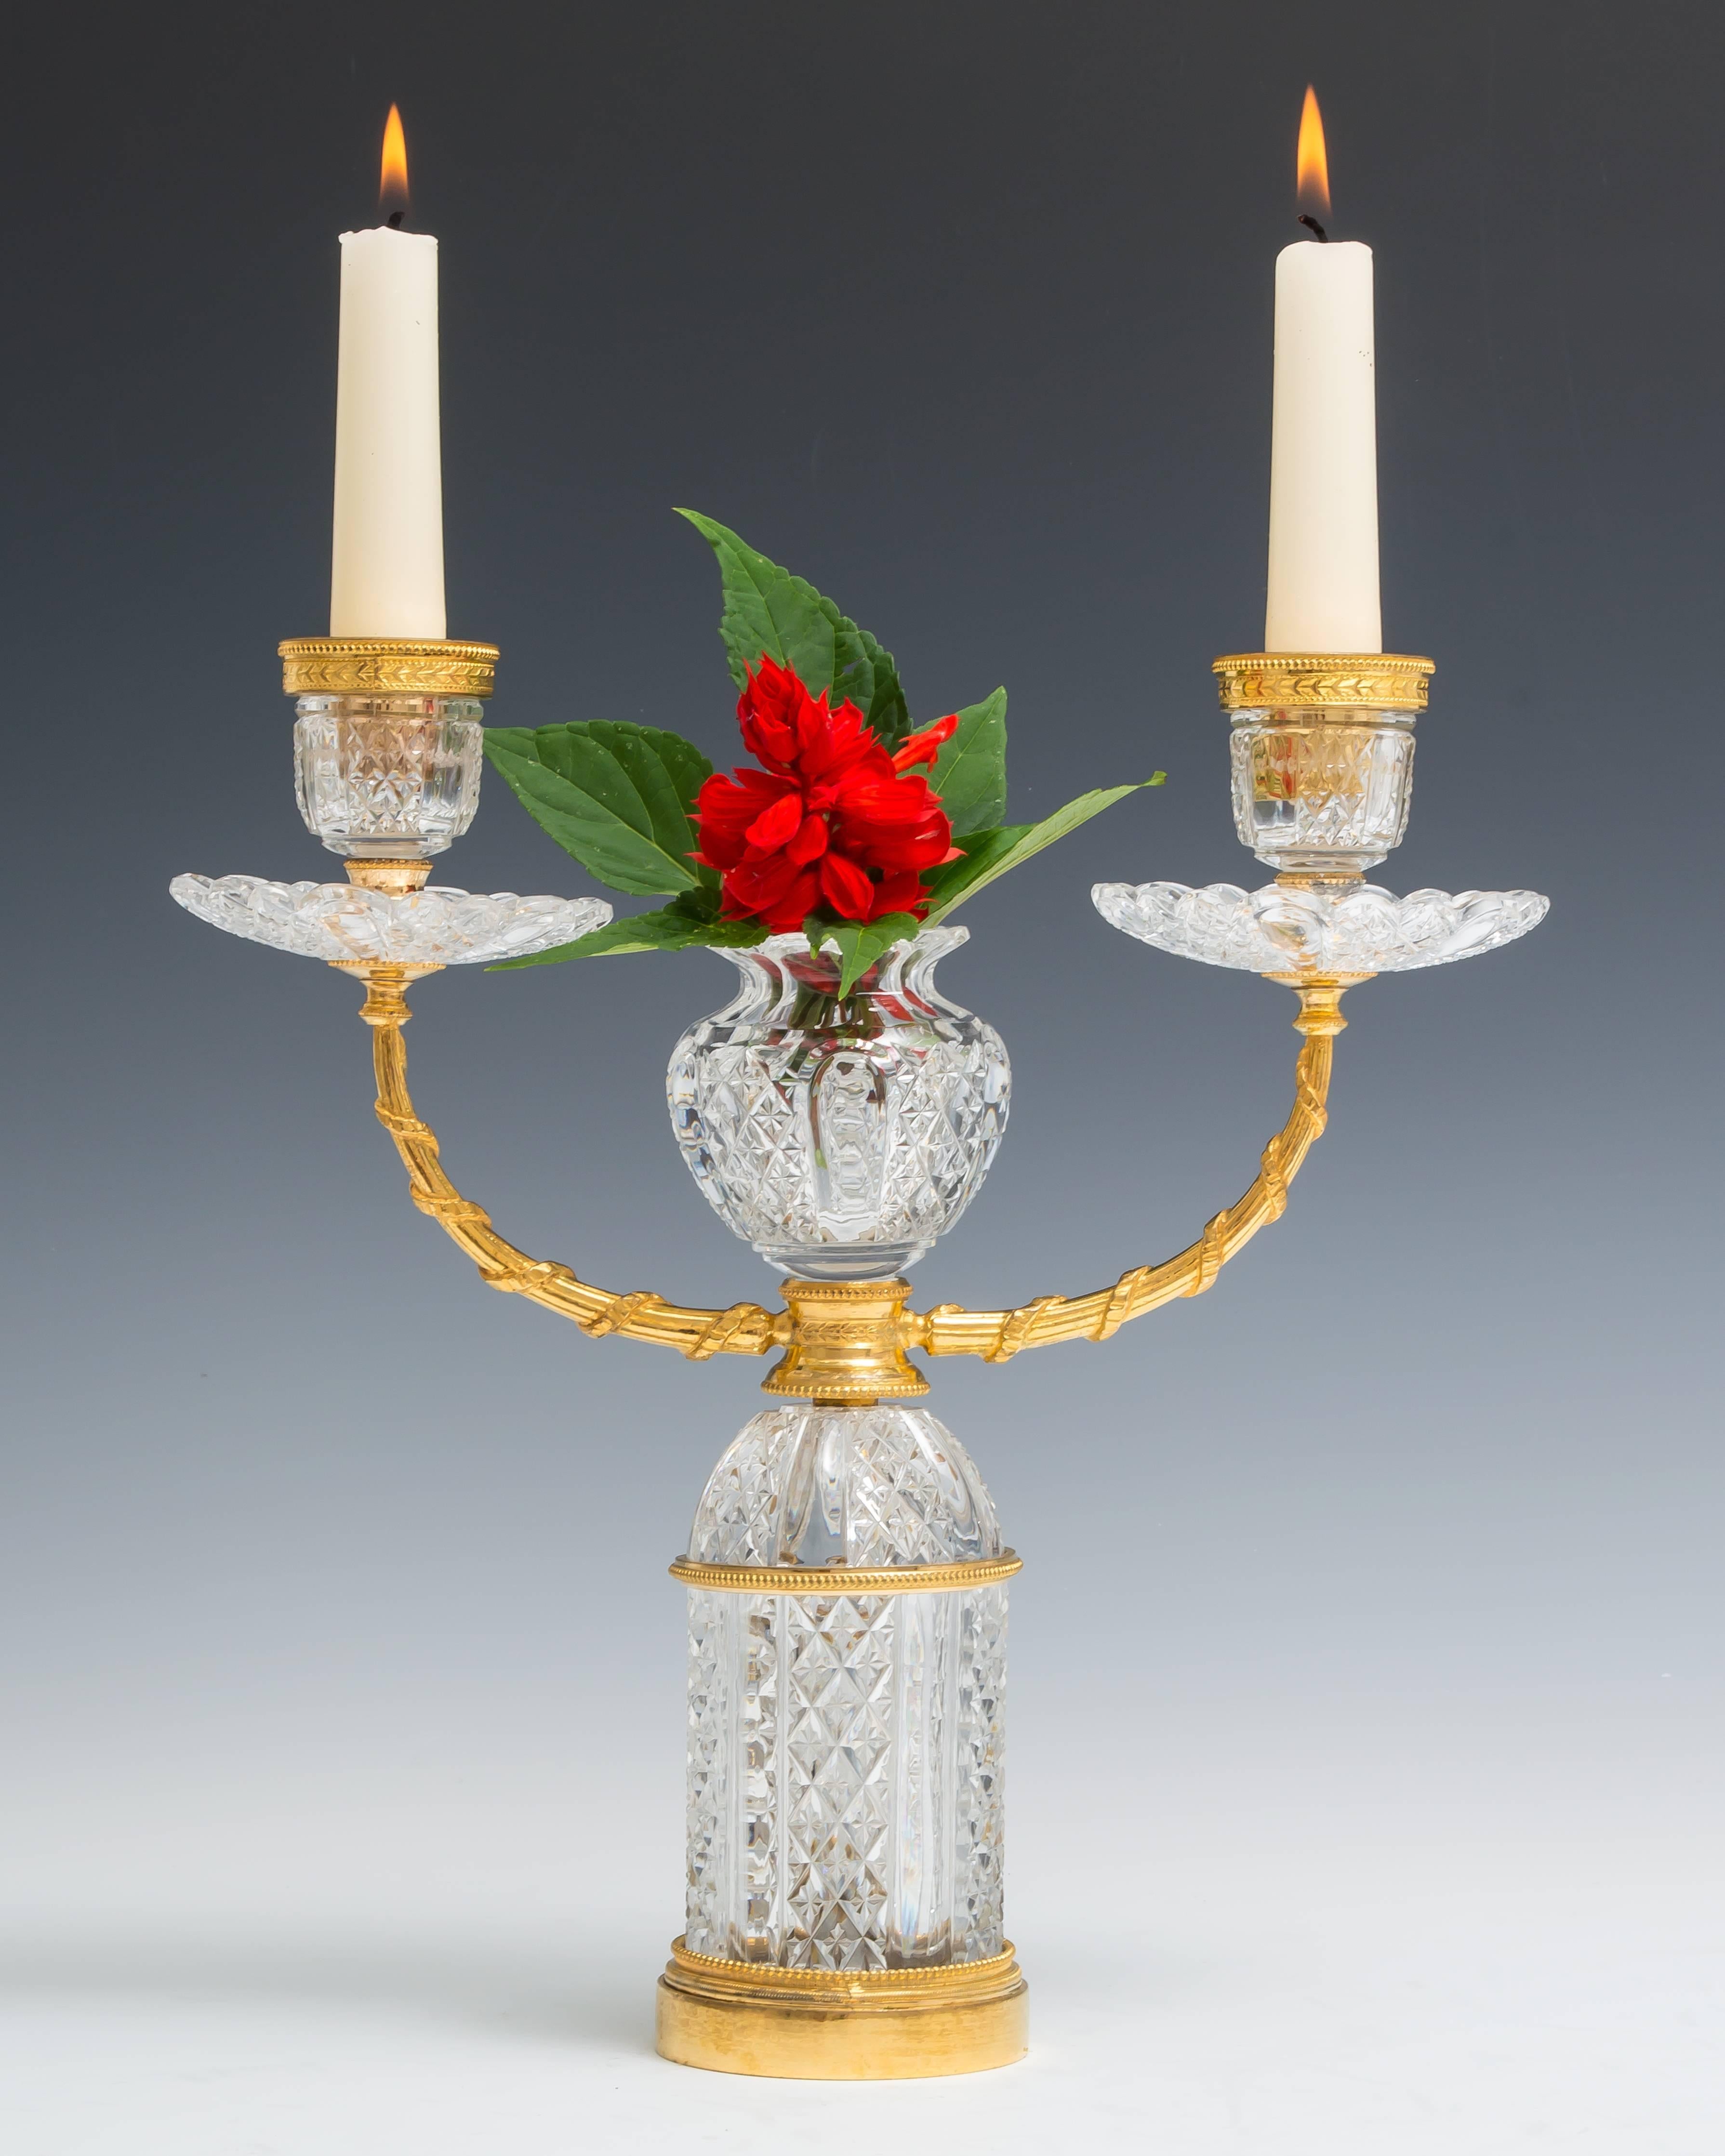 A pair of cut-glass and ormolu candelabra by F&C Osler the drum base cut with alternate pillar and star cut diamond panels issuing two arms terminating with drip pans and ormolu mounted candle nozzles with the same cutting the centred with a posy